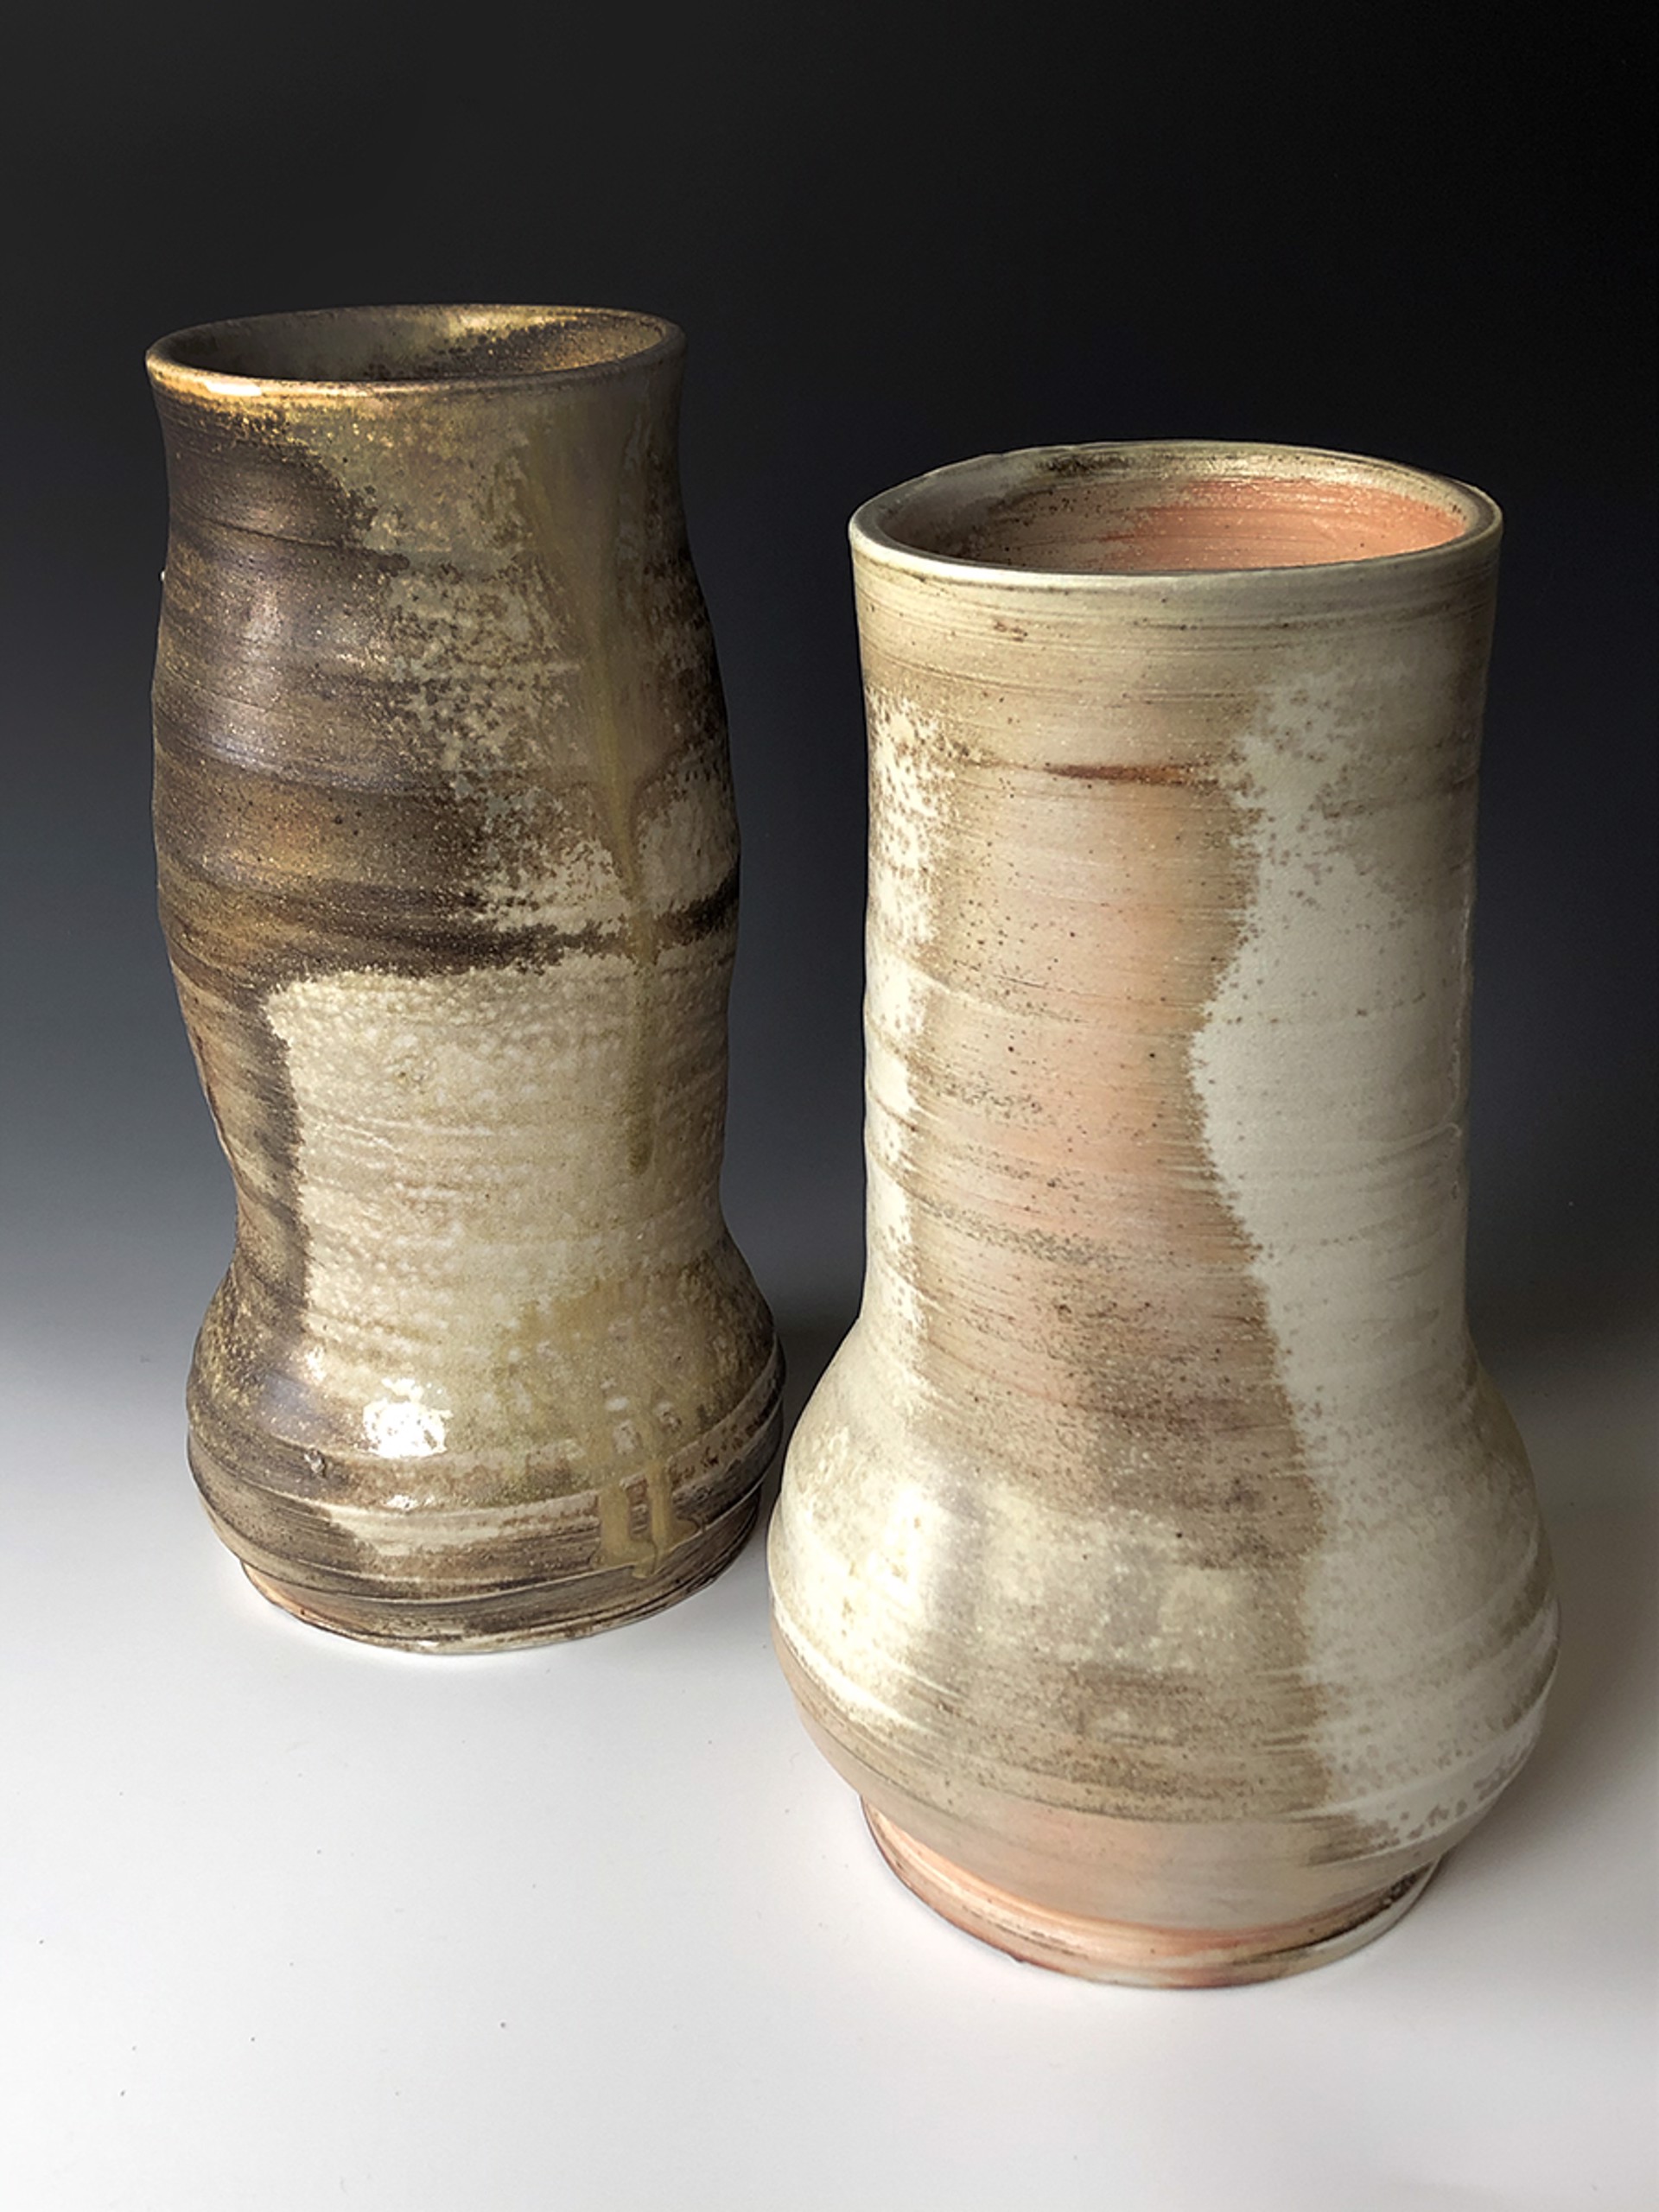 Two-Tone Vase 1 (left in image) by Dom Venzant